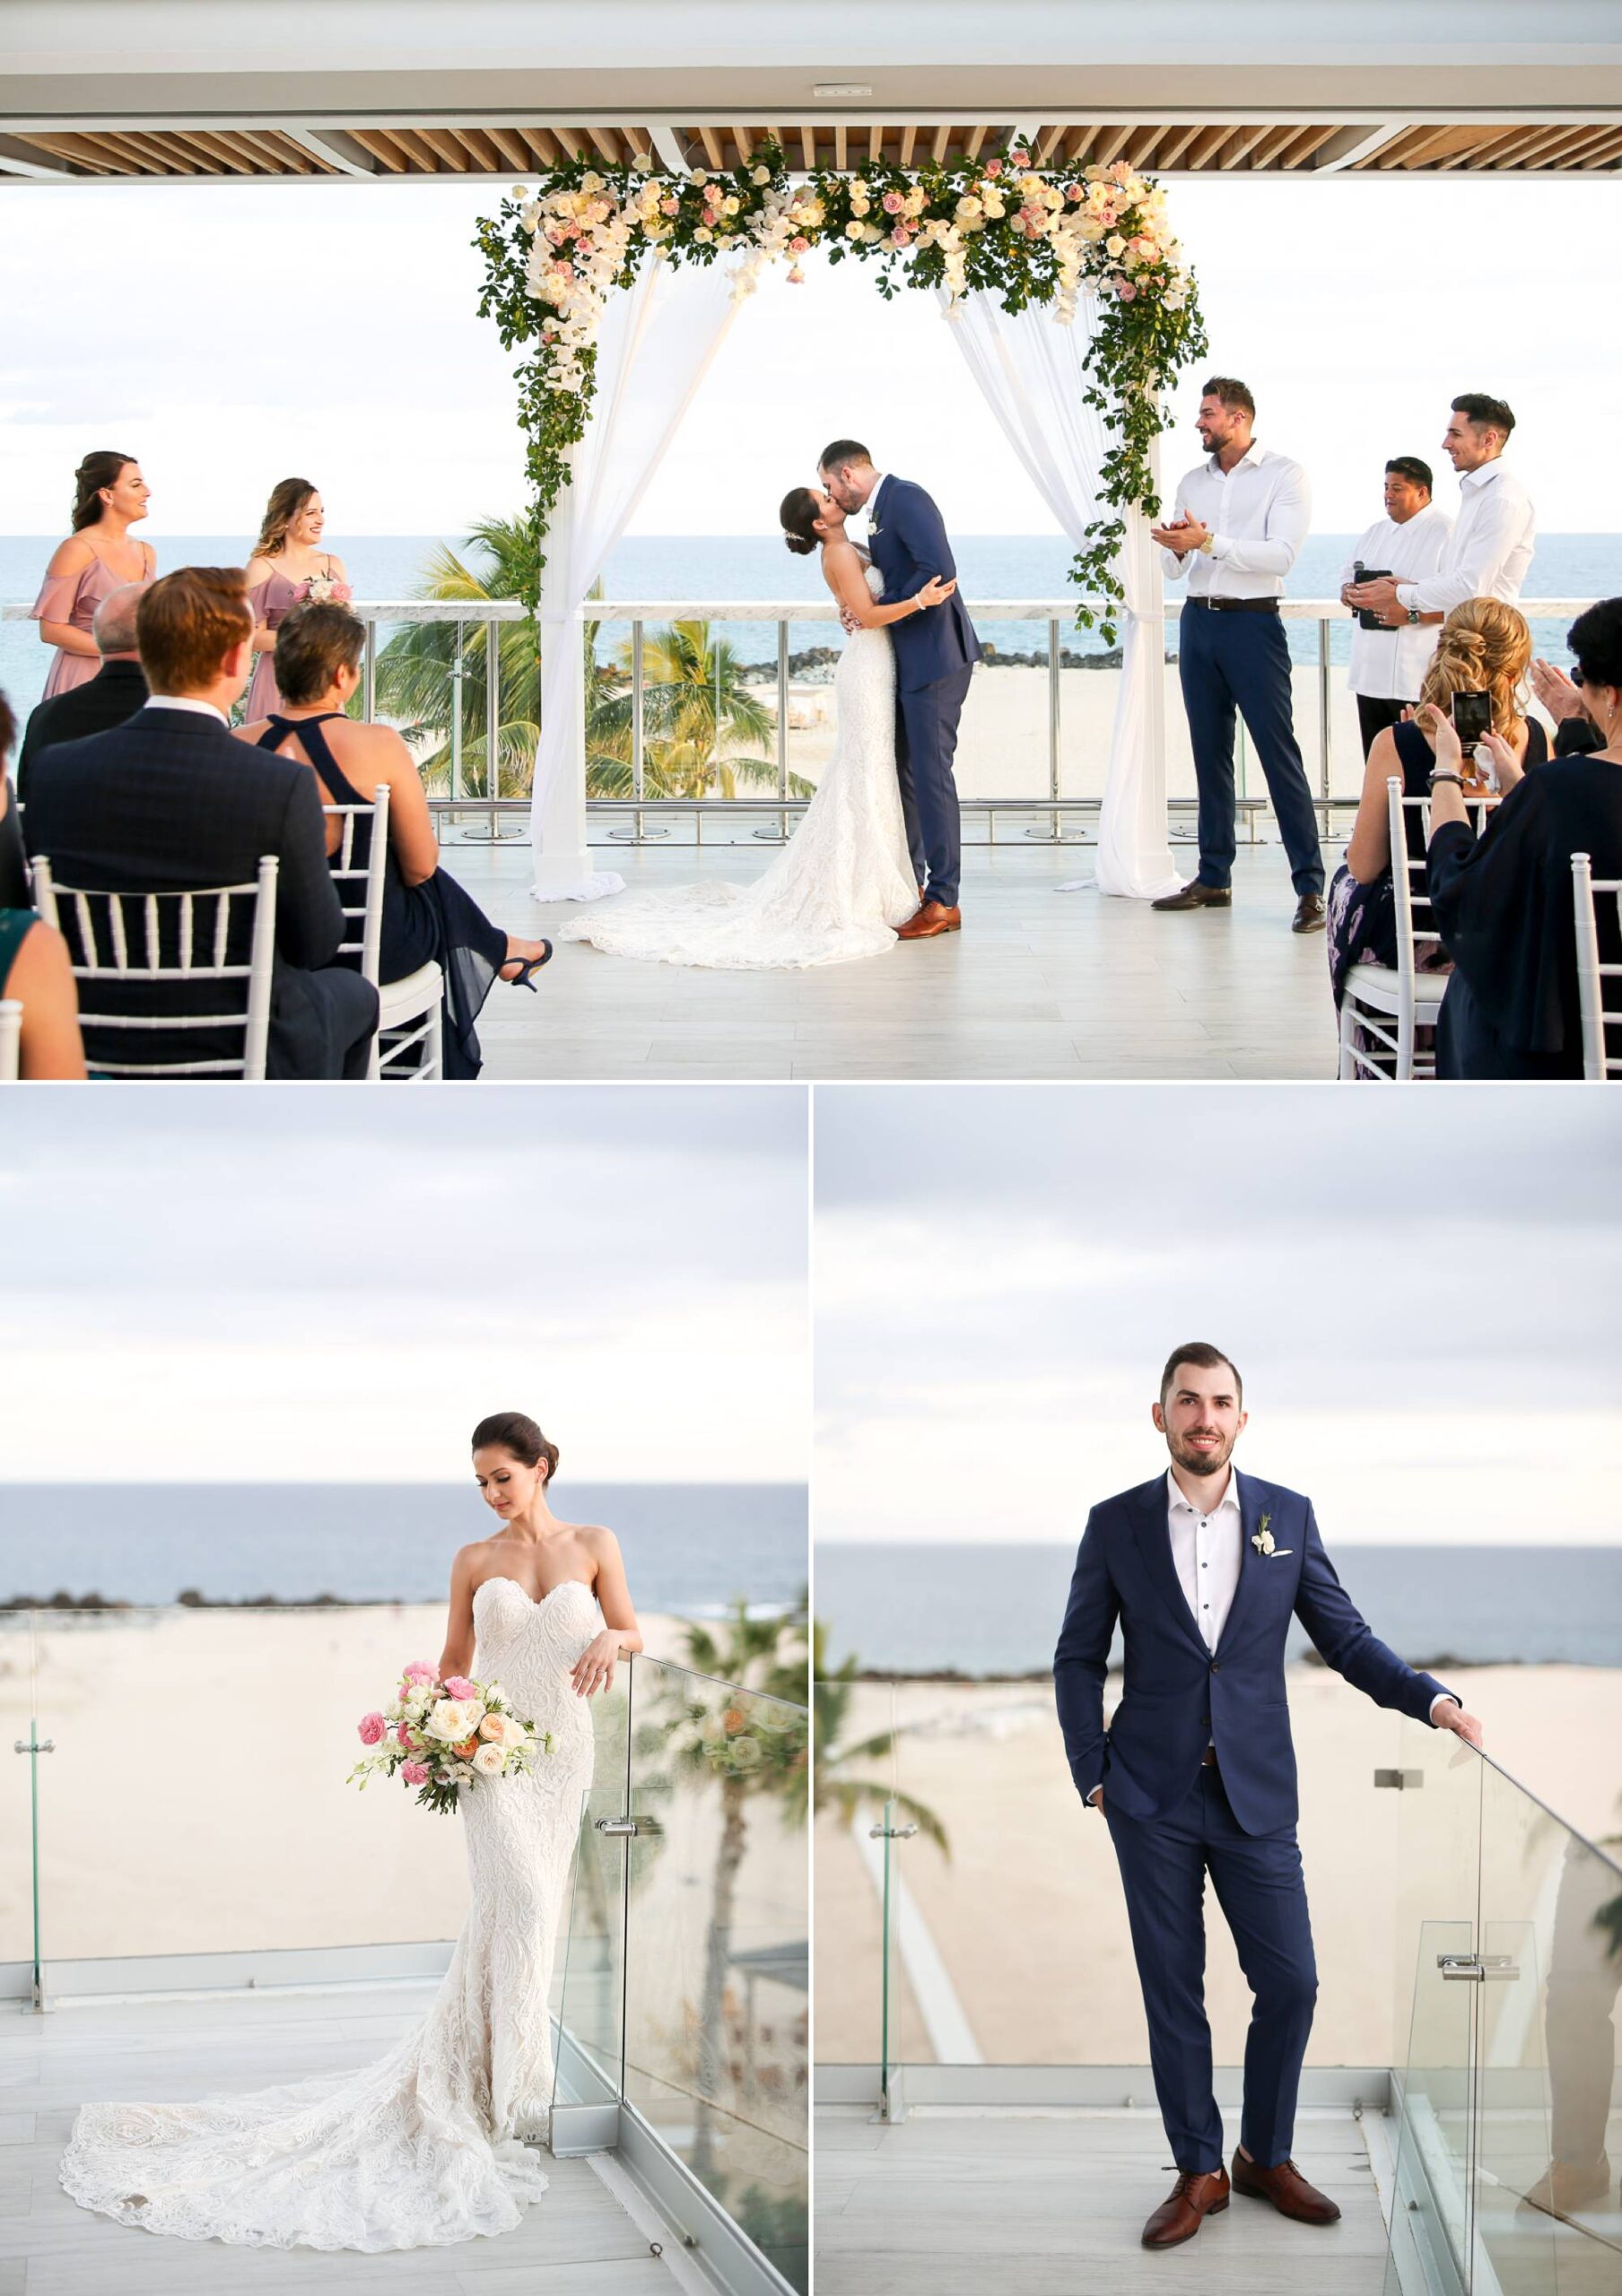 Wedding first kiss ceremony overlooking the ocean in Mexico